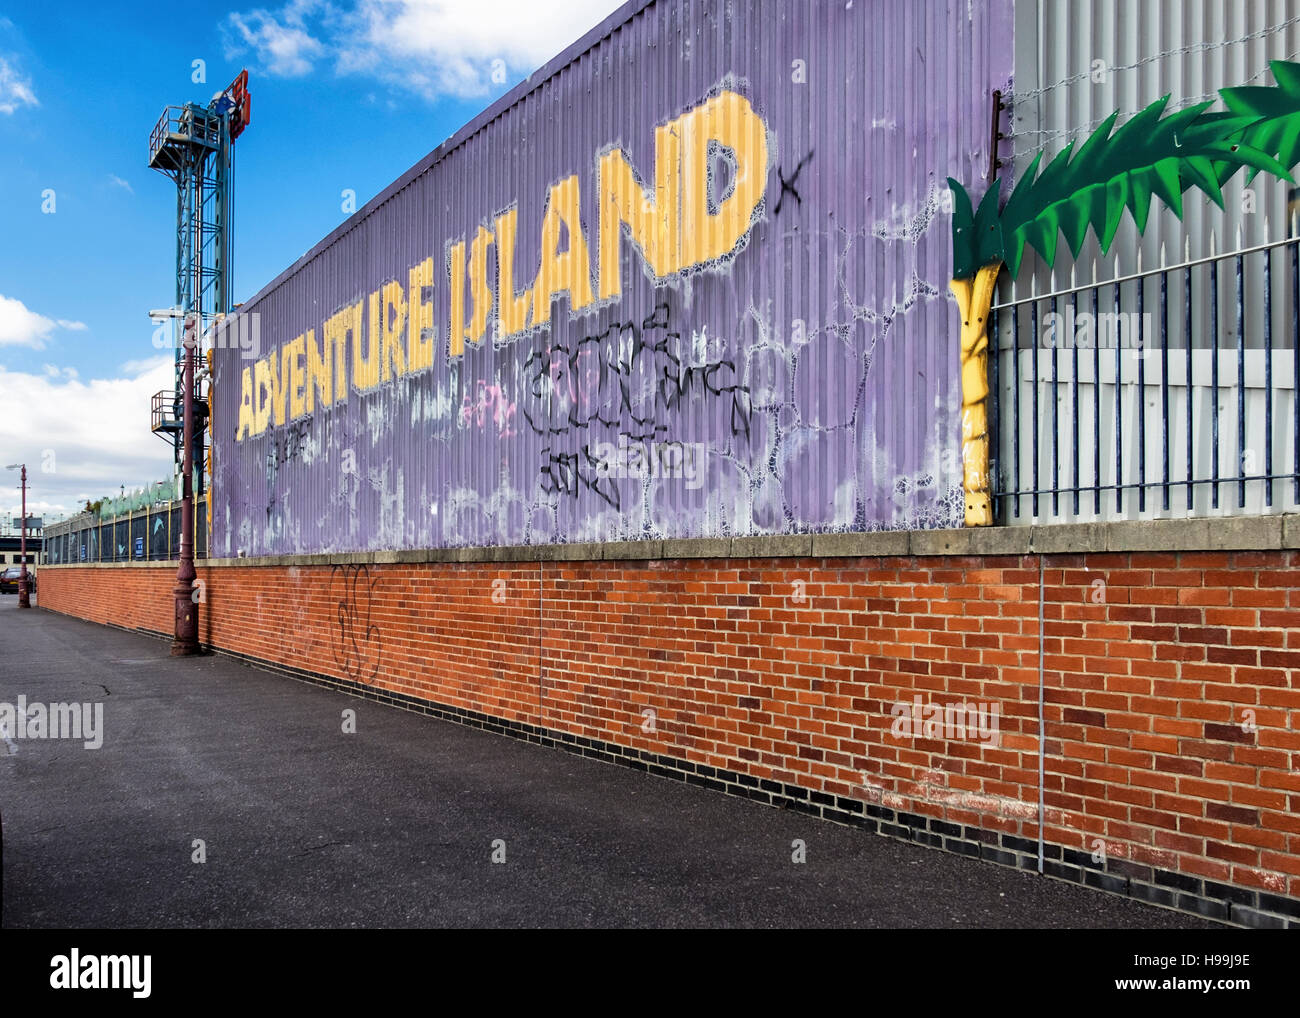 Adventure Island Amusement Park, Old sign and fence. Southend-on-sea, Essex,England Stock Photo